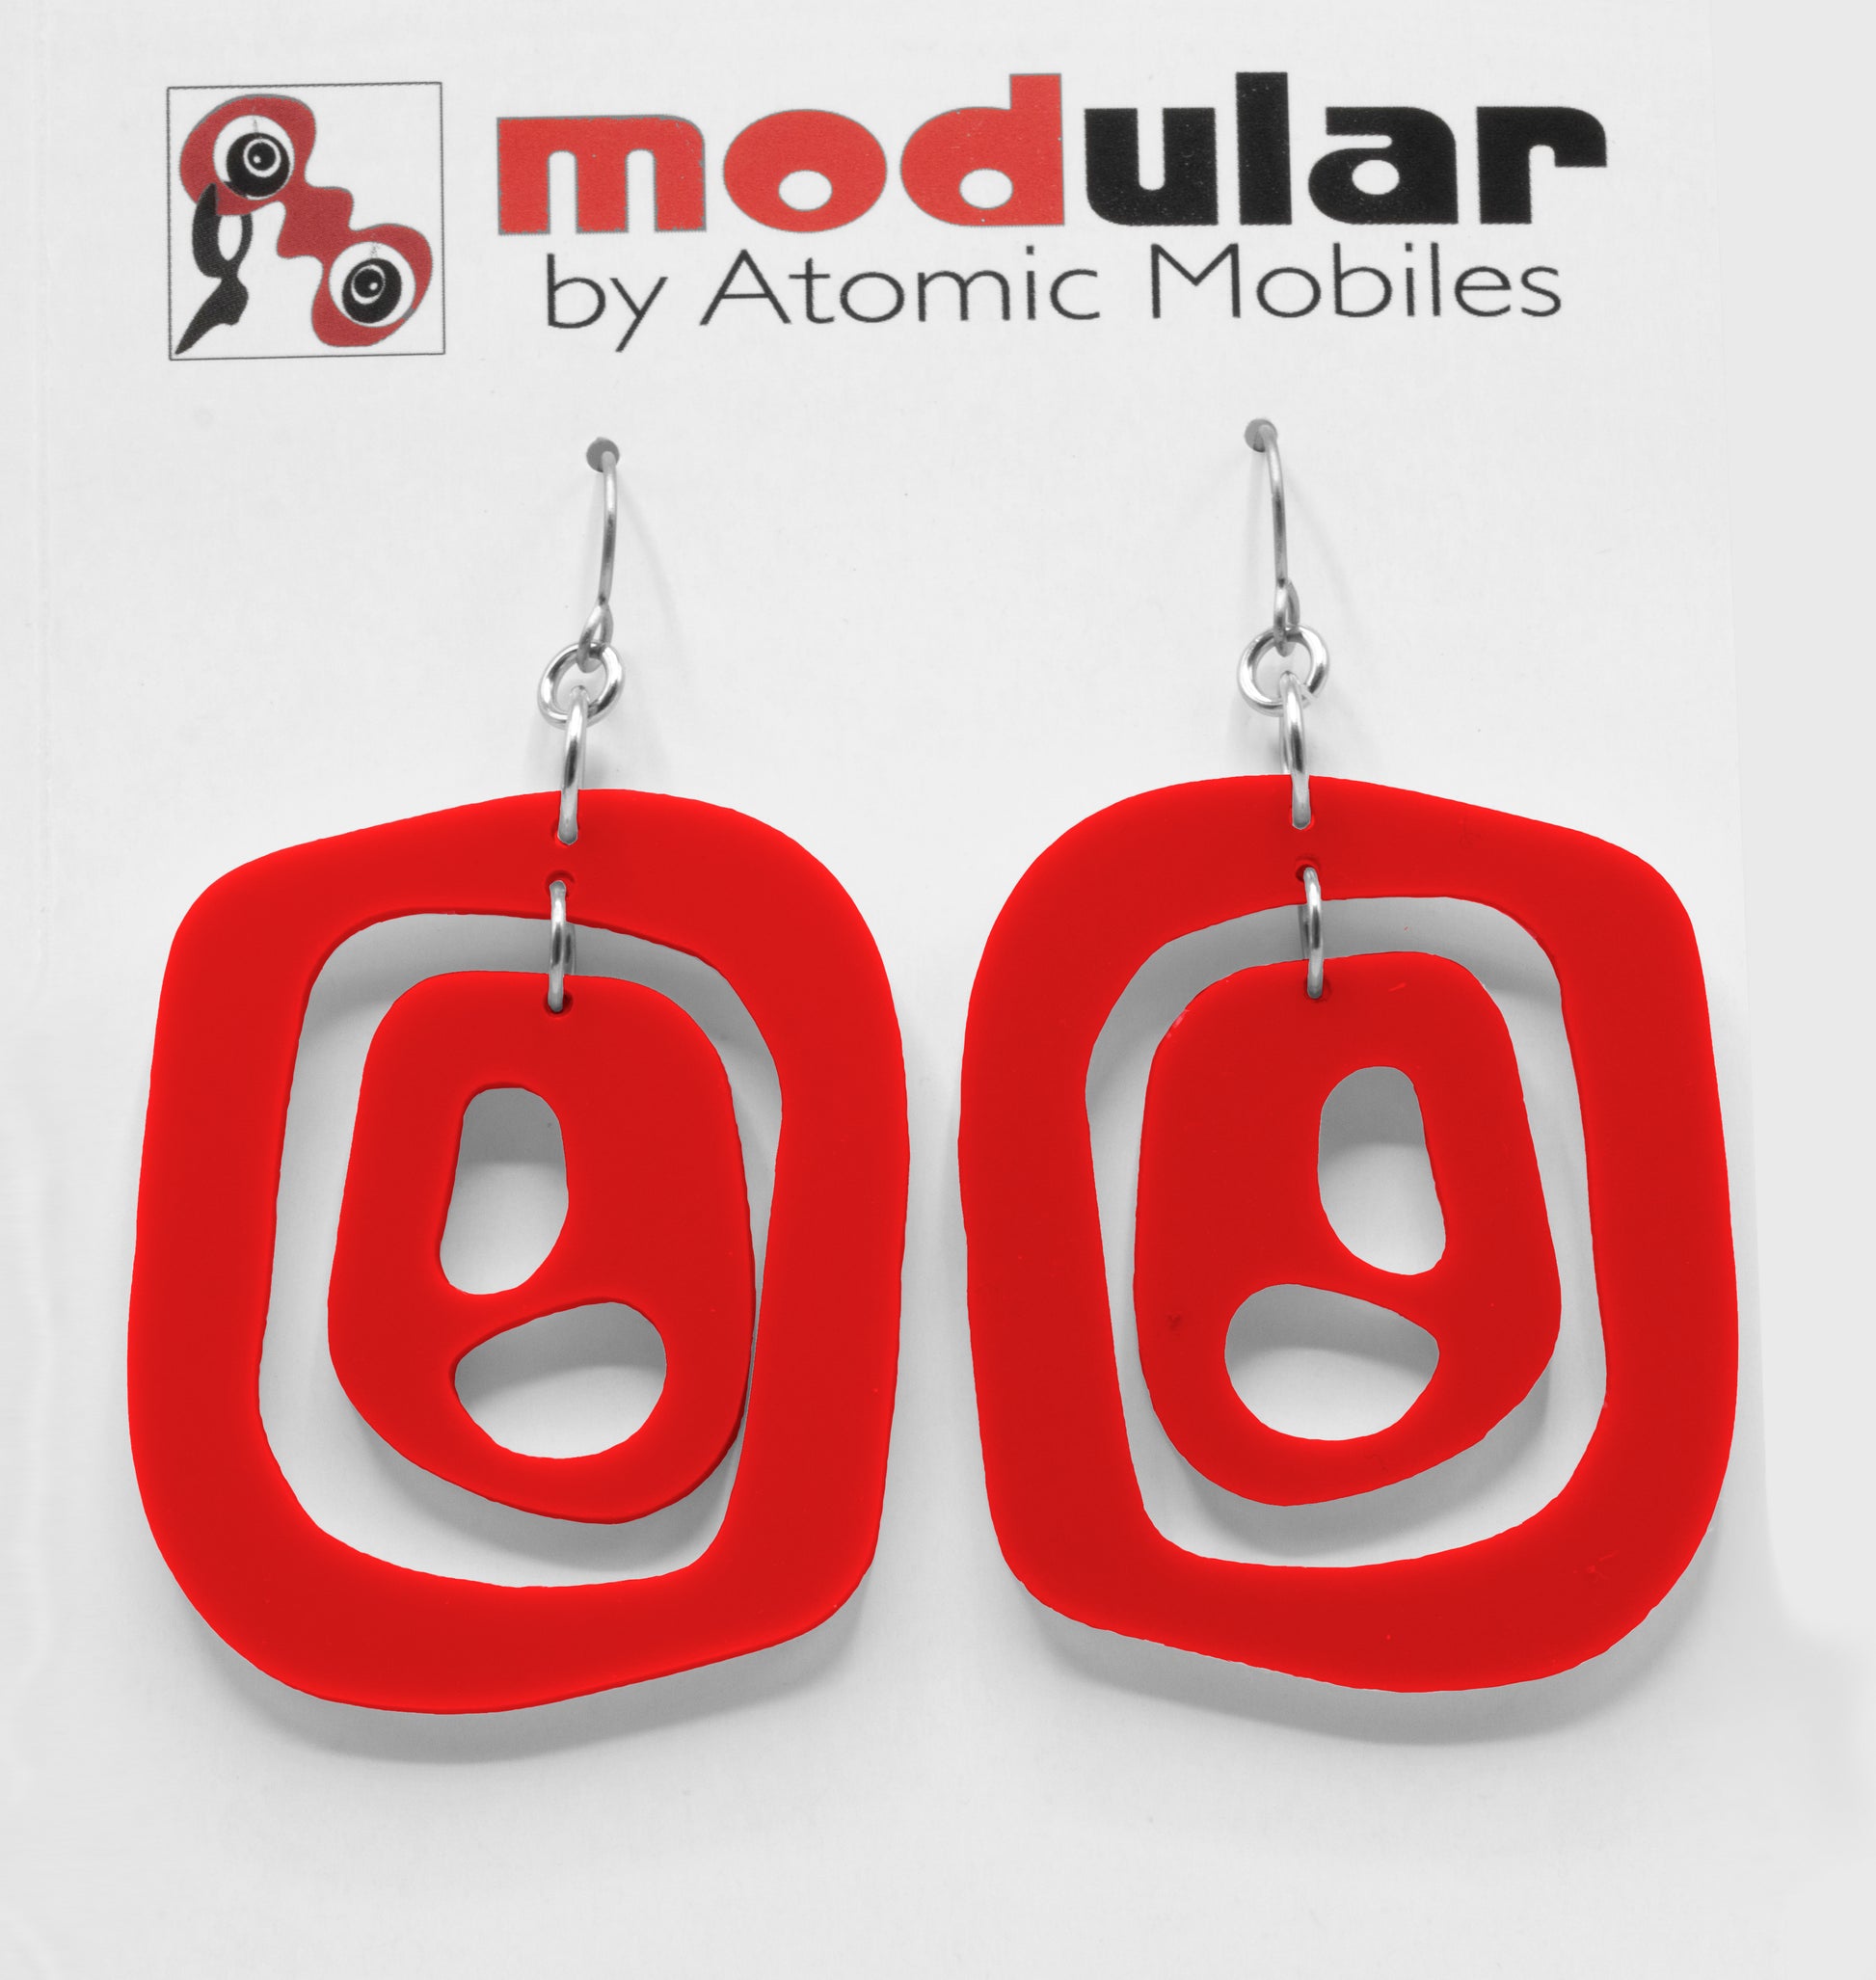 MODular Earrings - Mid 20th Statement Earrings in Red by AtomicMobiles.com - retro era mod handmade jewelry